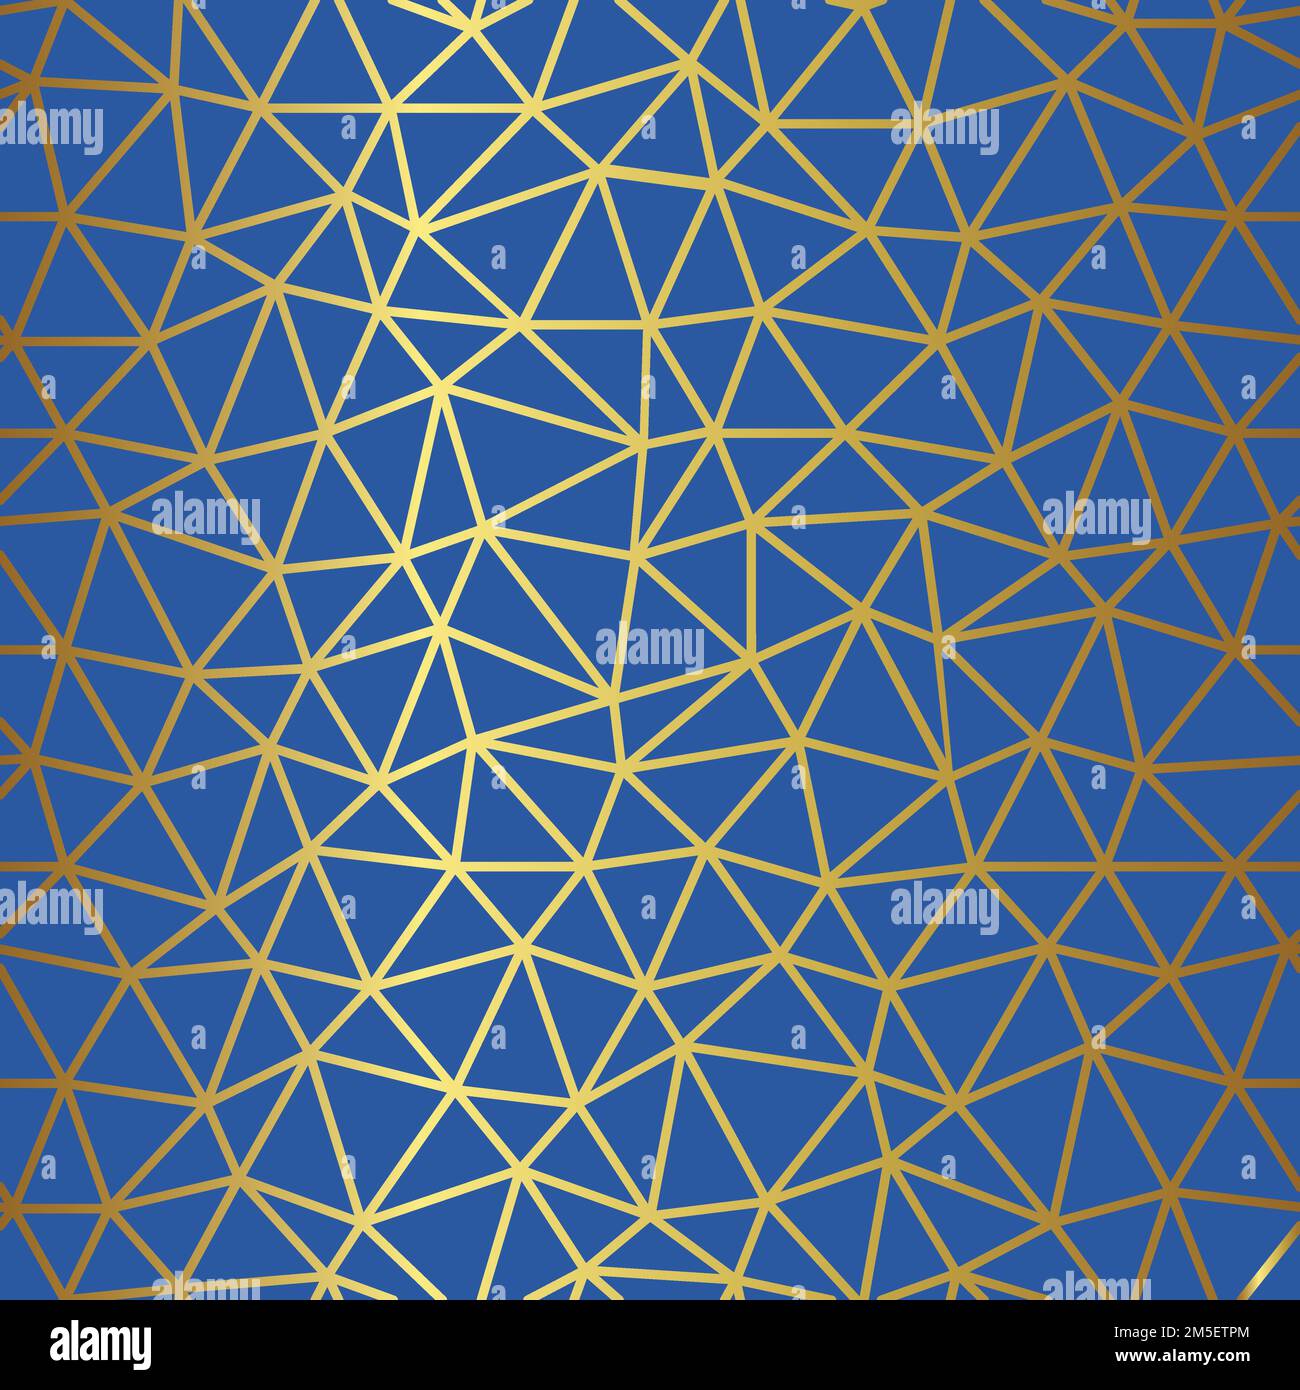 Golden polygon mesh vector seamless pattern. Great for packaging, backgrounds Stock Vector